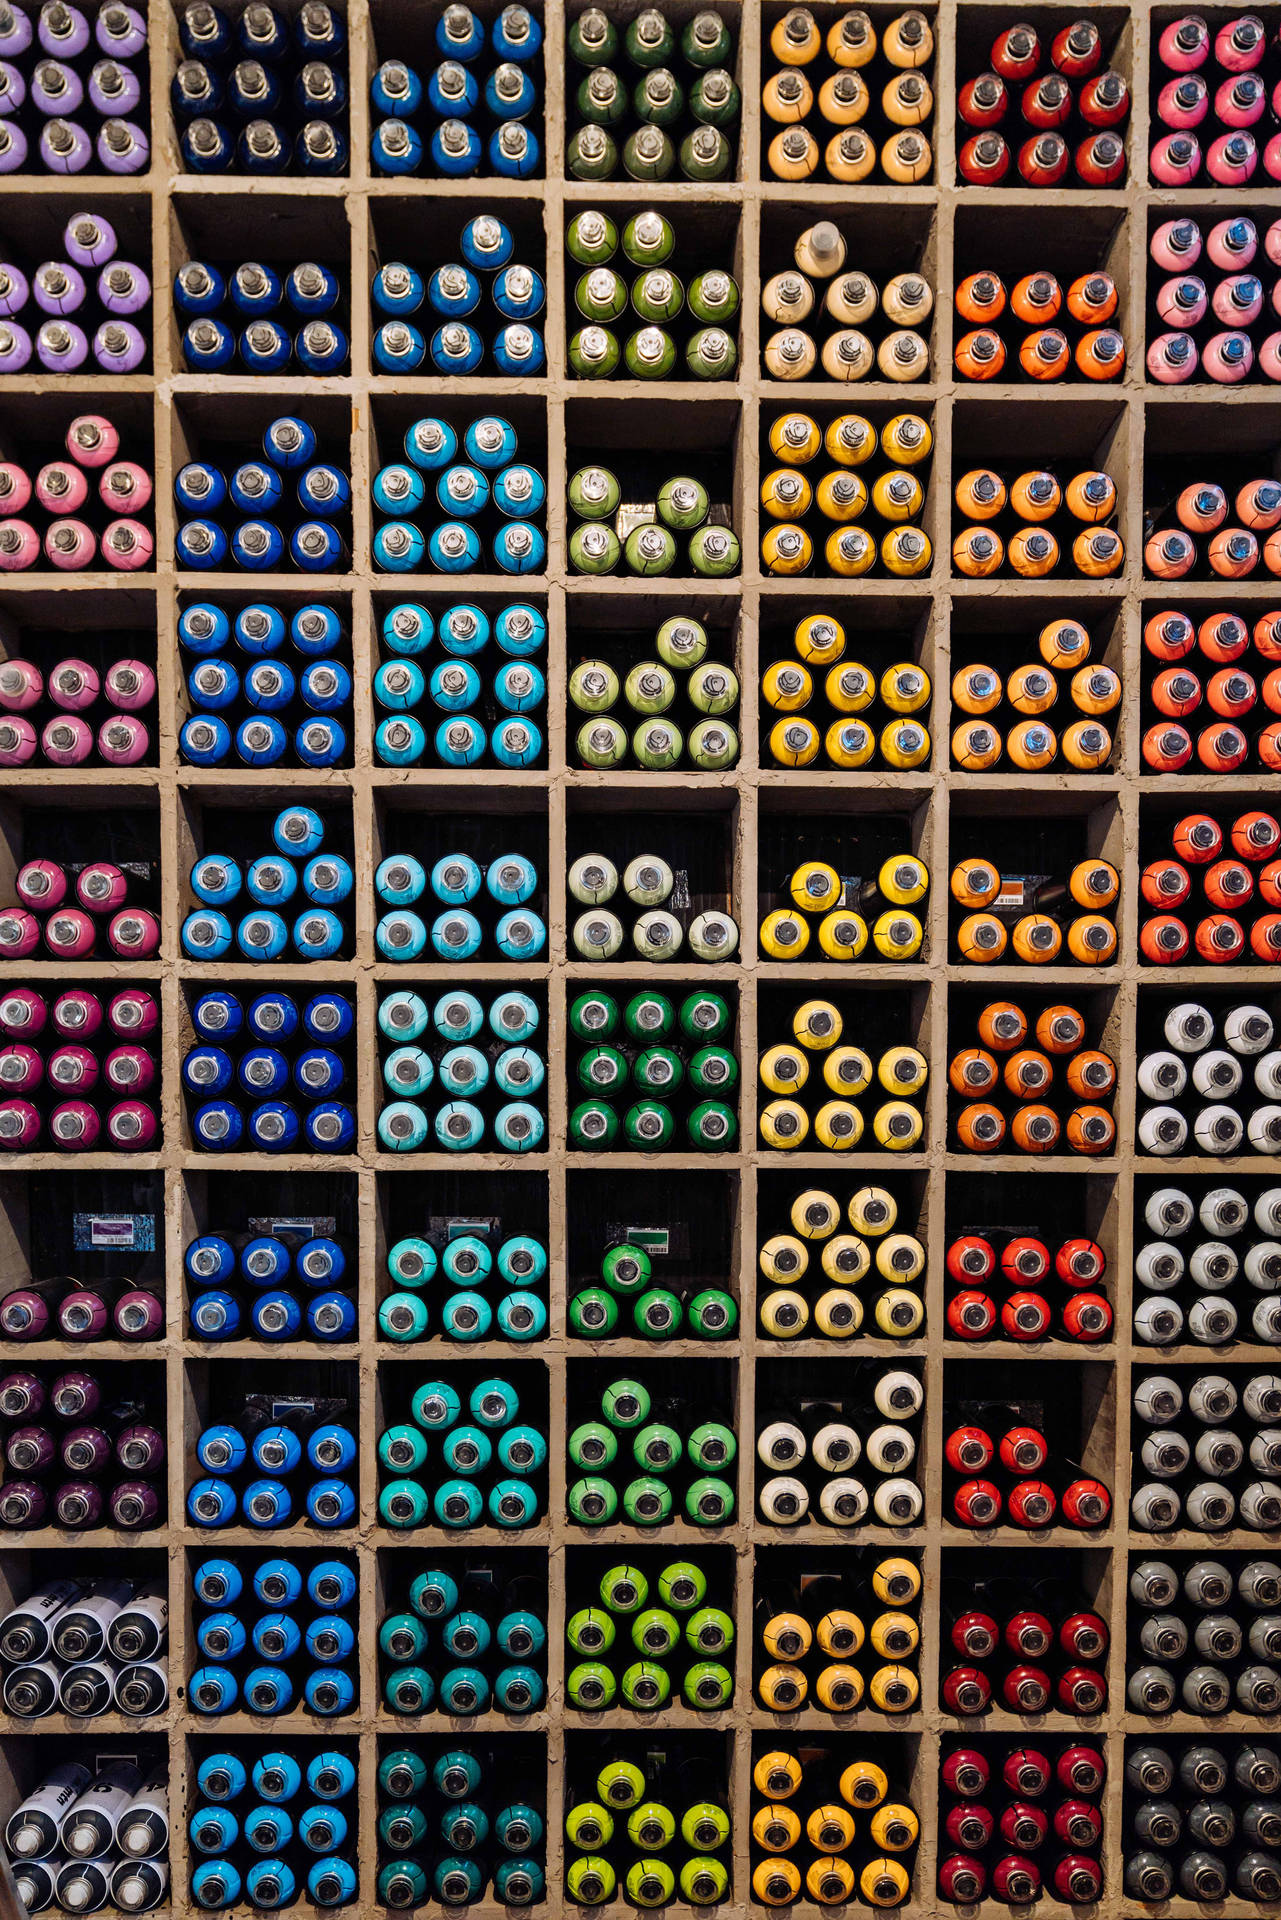 Paint Cans On Shelves Wallpaper